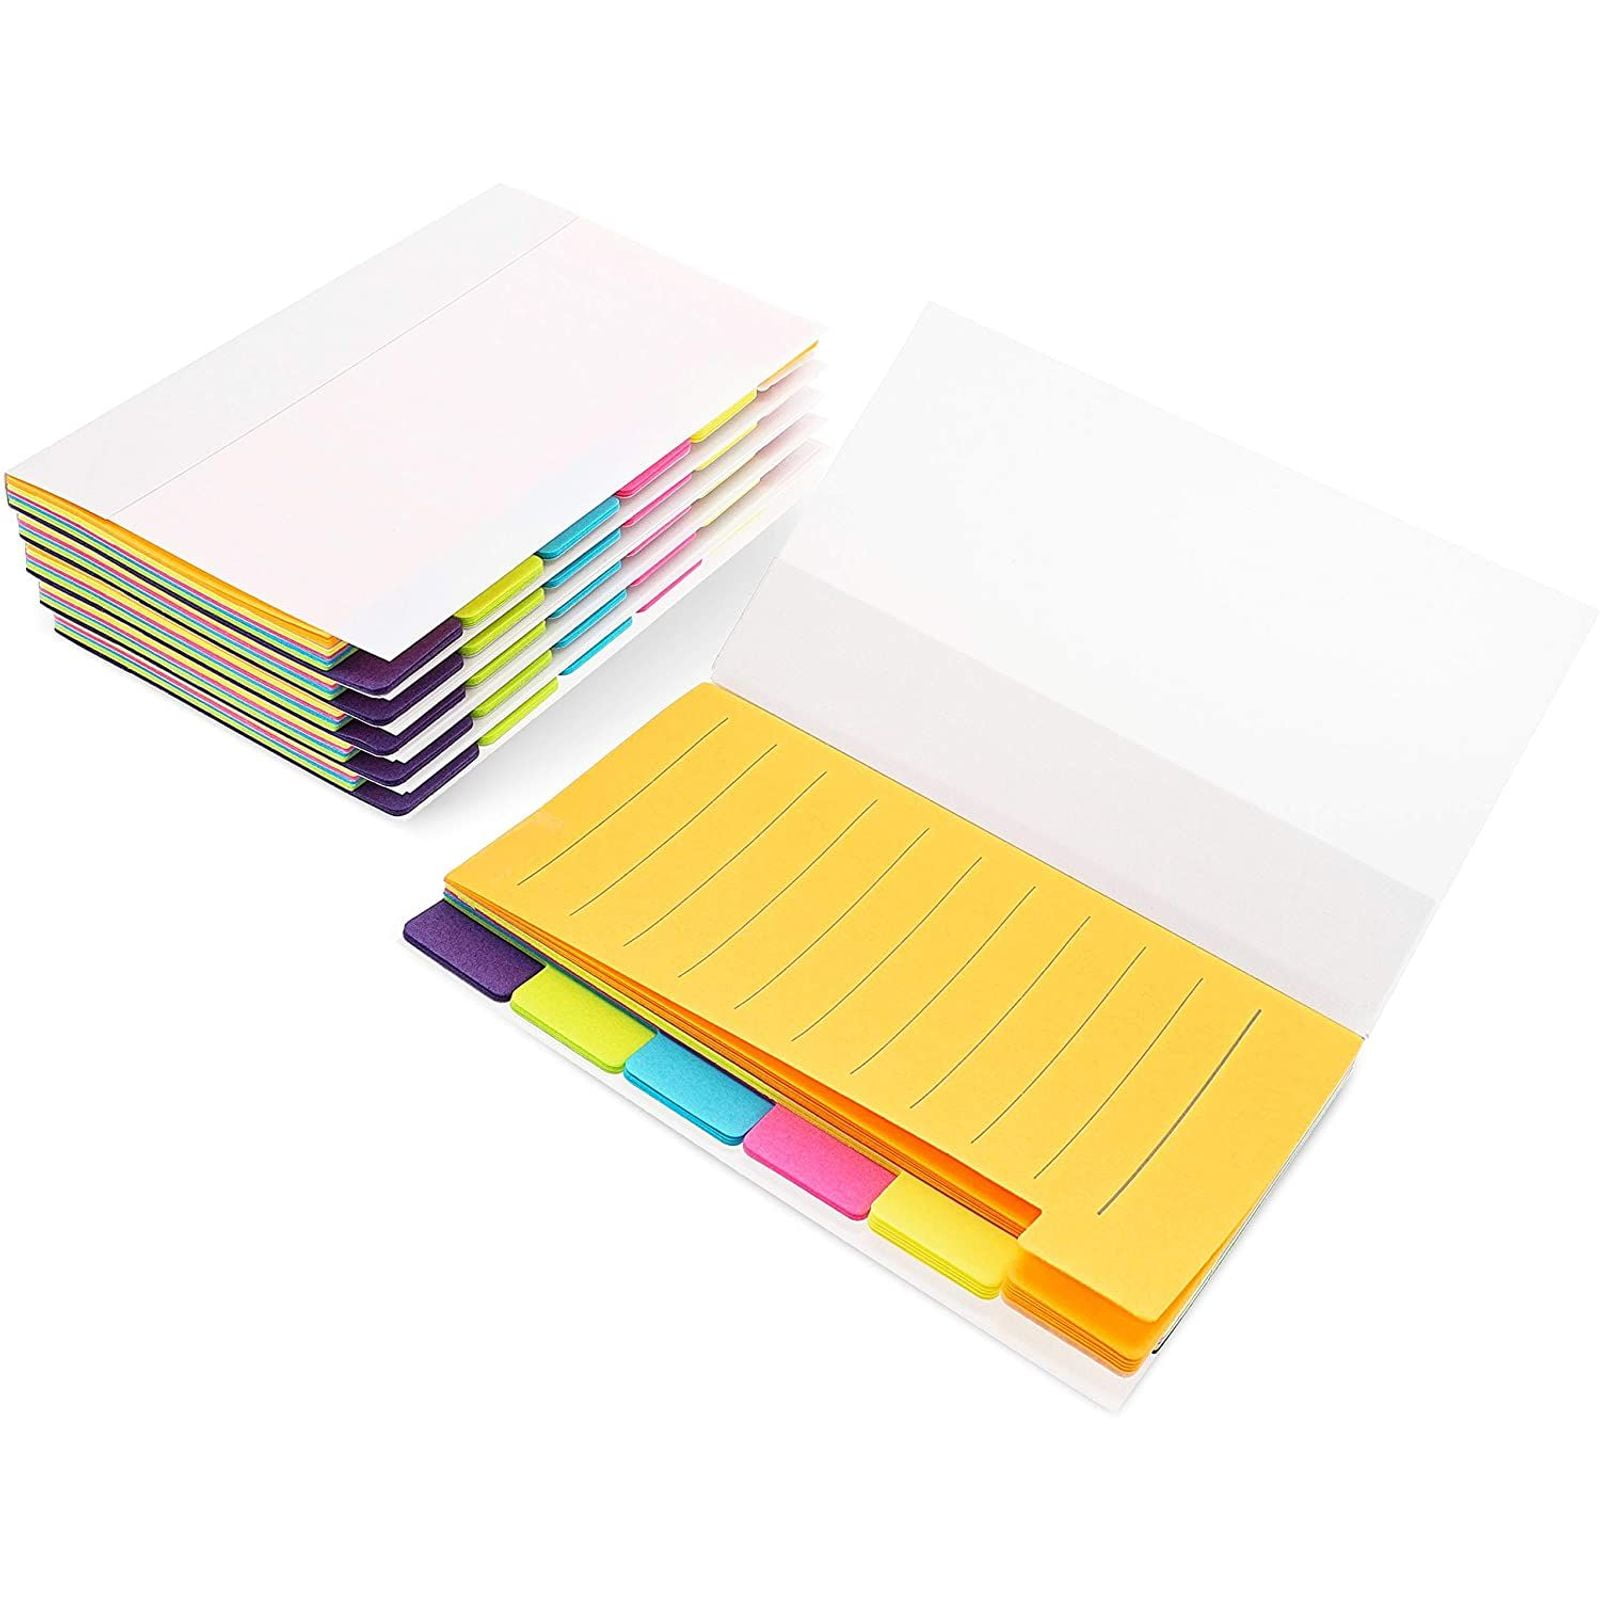 Bookmark Page Markers Best Paper Greetings 6-Pack Colored Divider Sticky Notes 3 x 5 Inches Color Coded Index Tab Stickers 360 Ruled Sheets